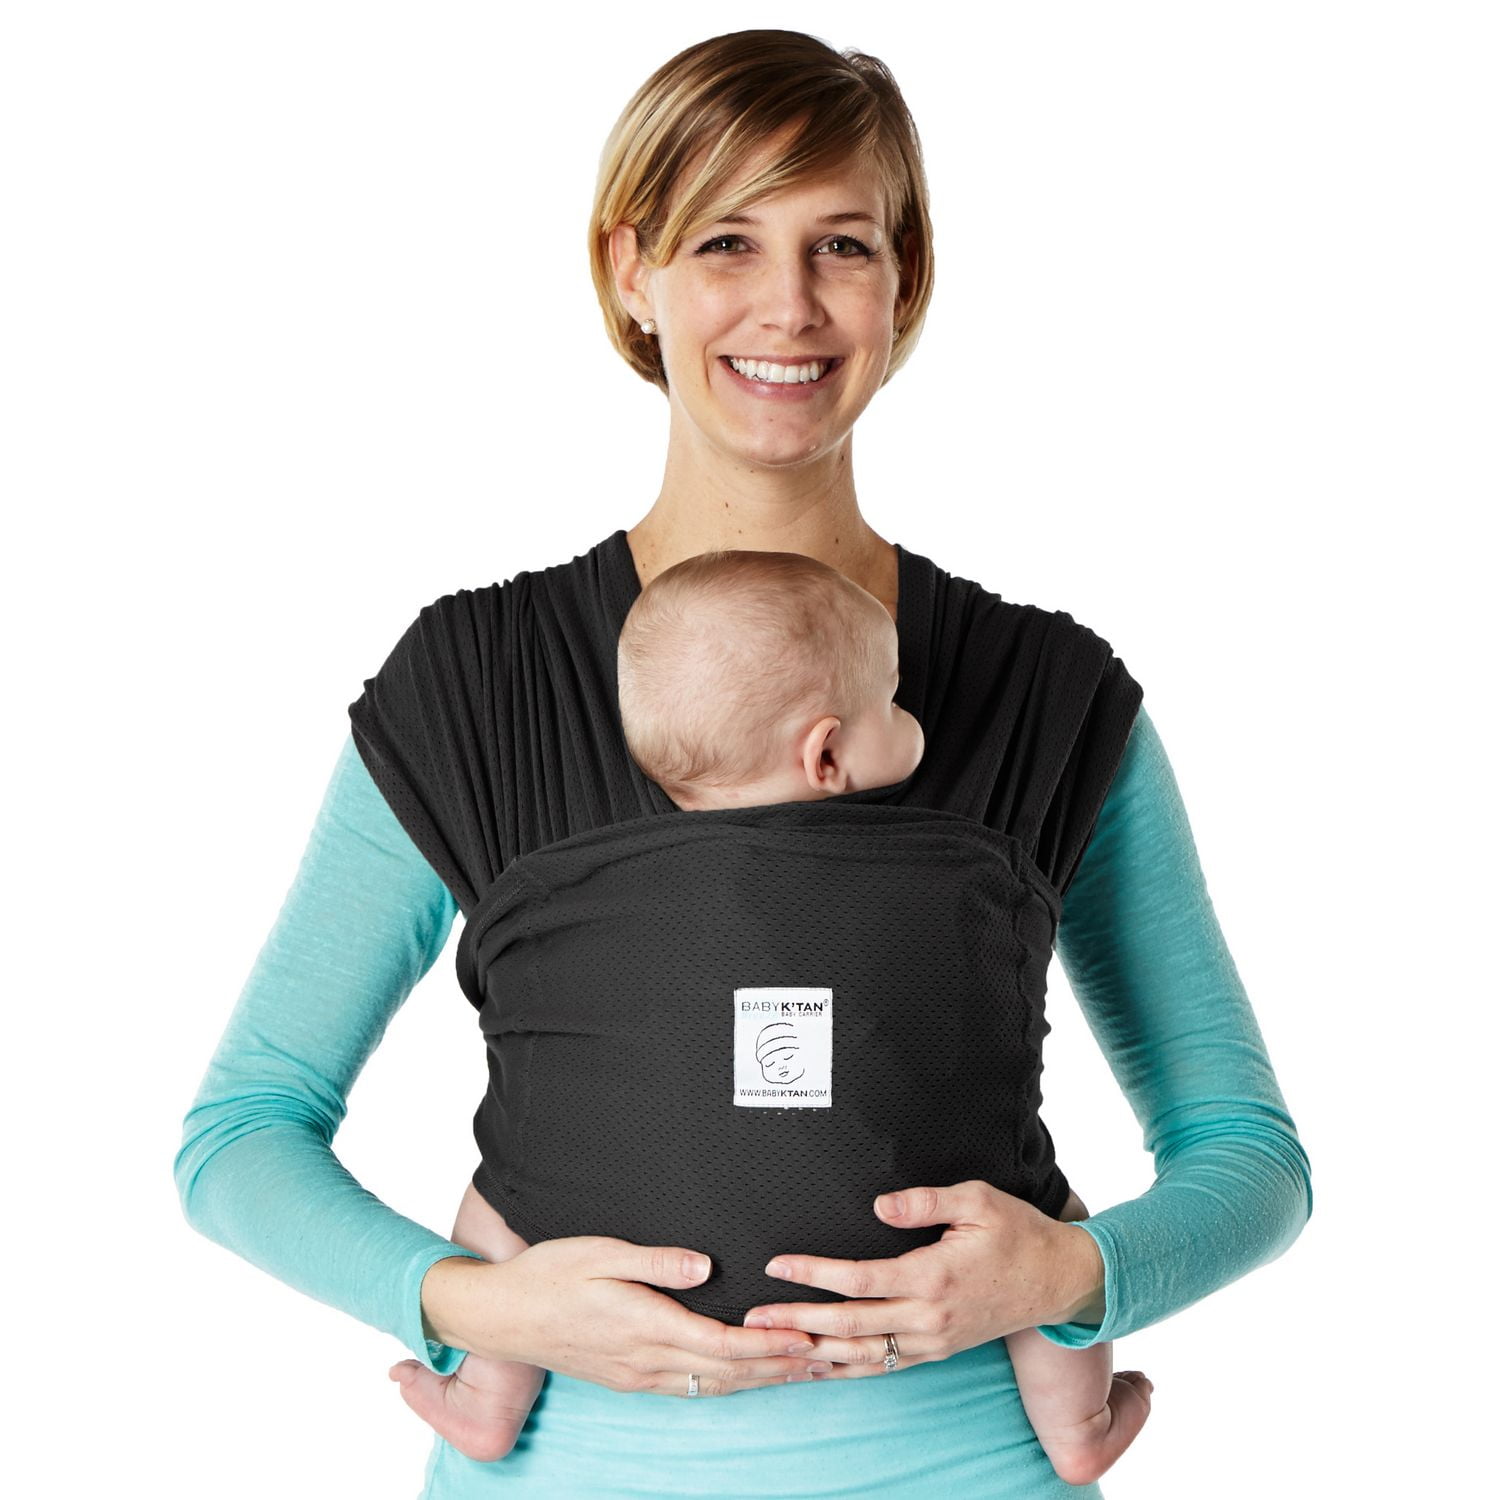 small baby carrier